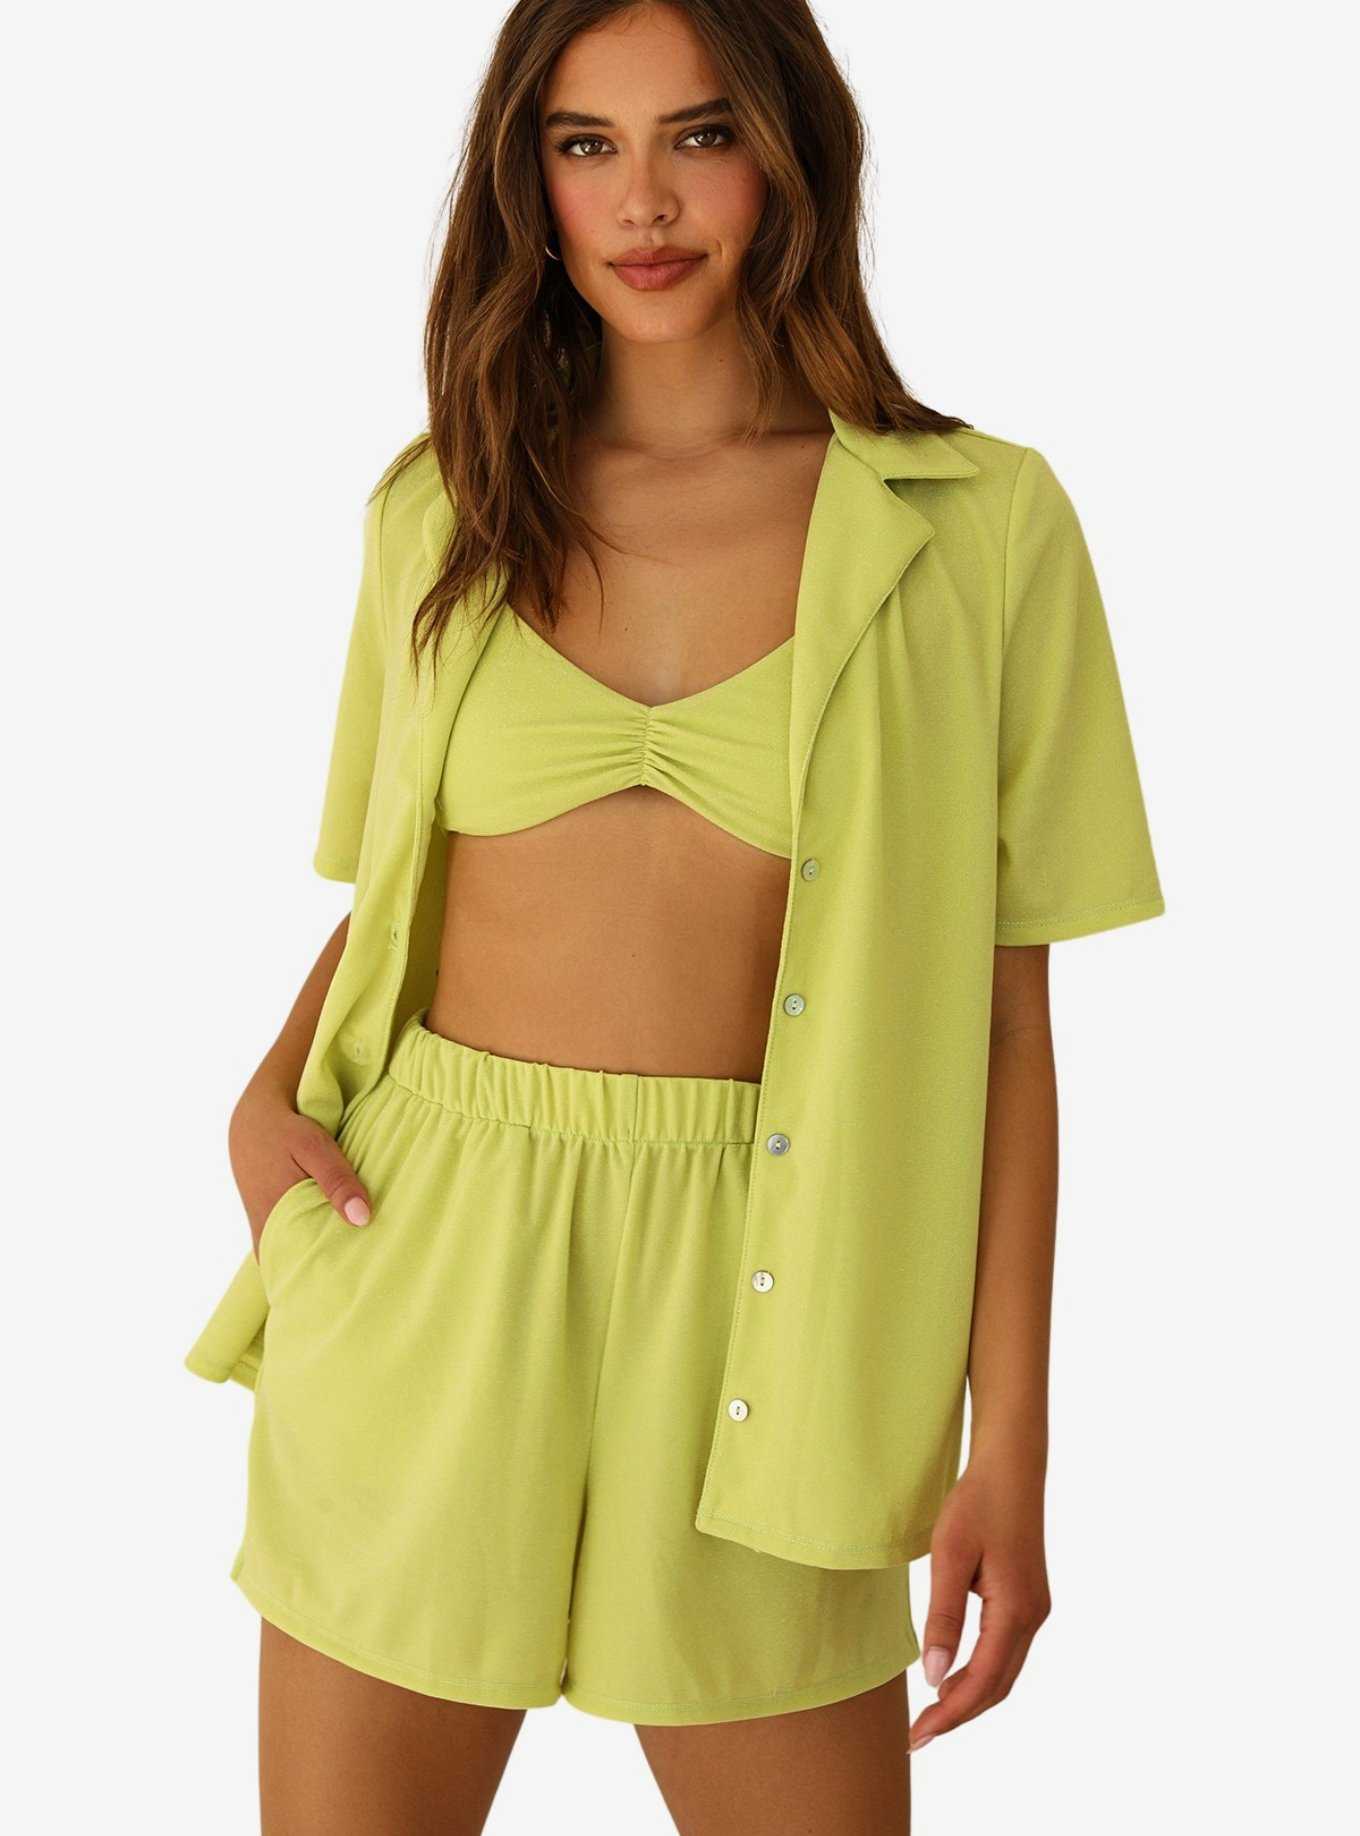 Dippin' Daisy's Mary-Kate Swim Top Cover-Up Lime Green, , hi-res